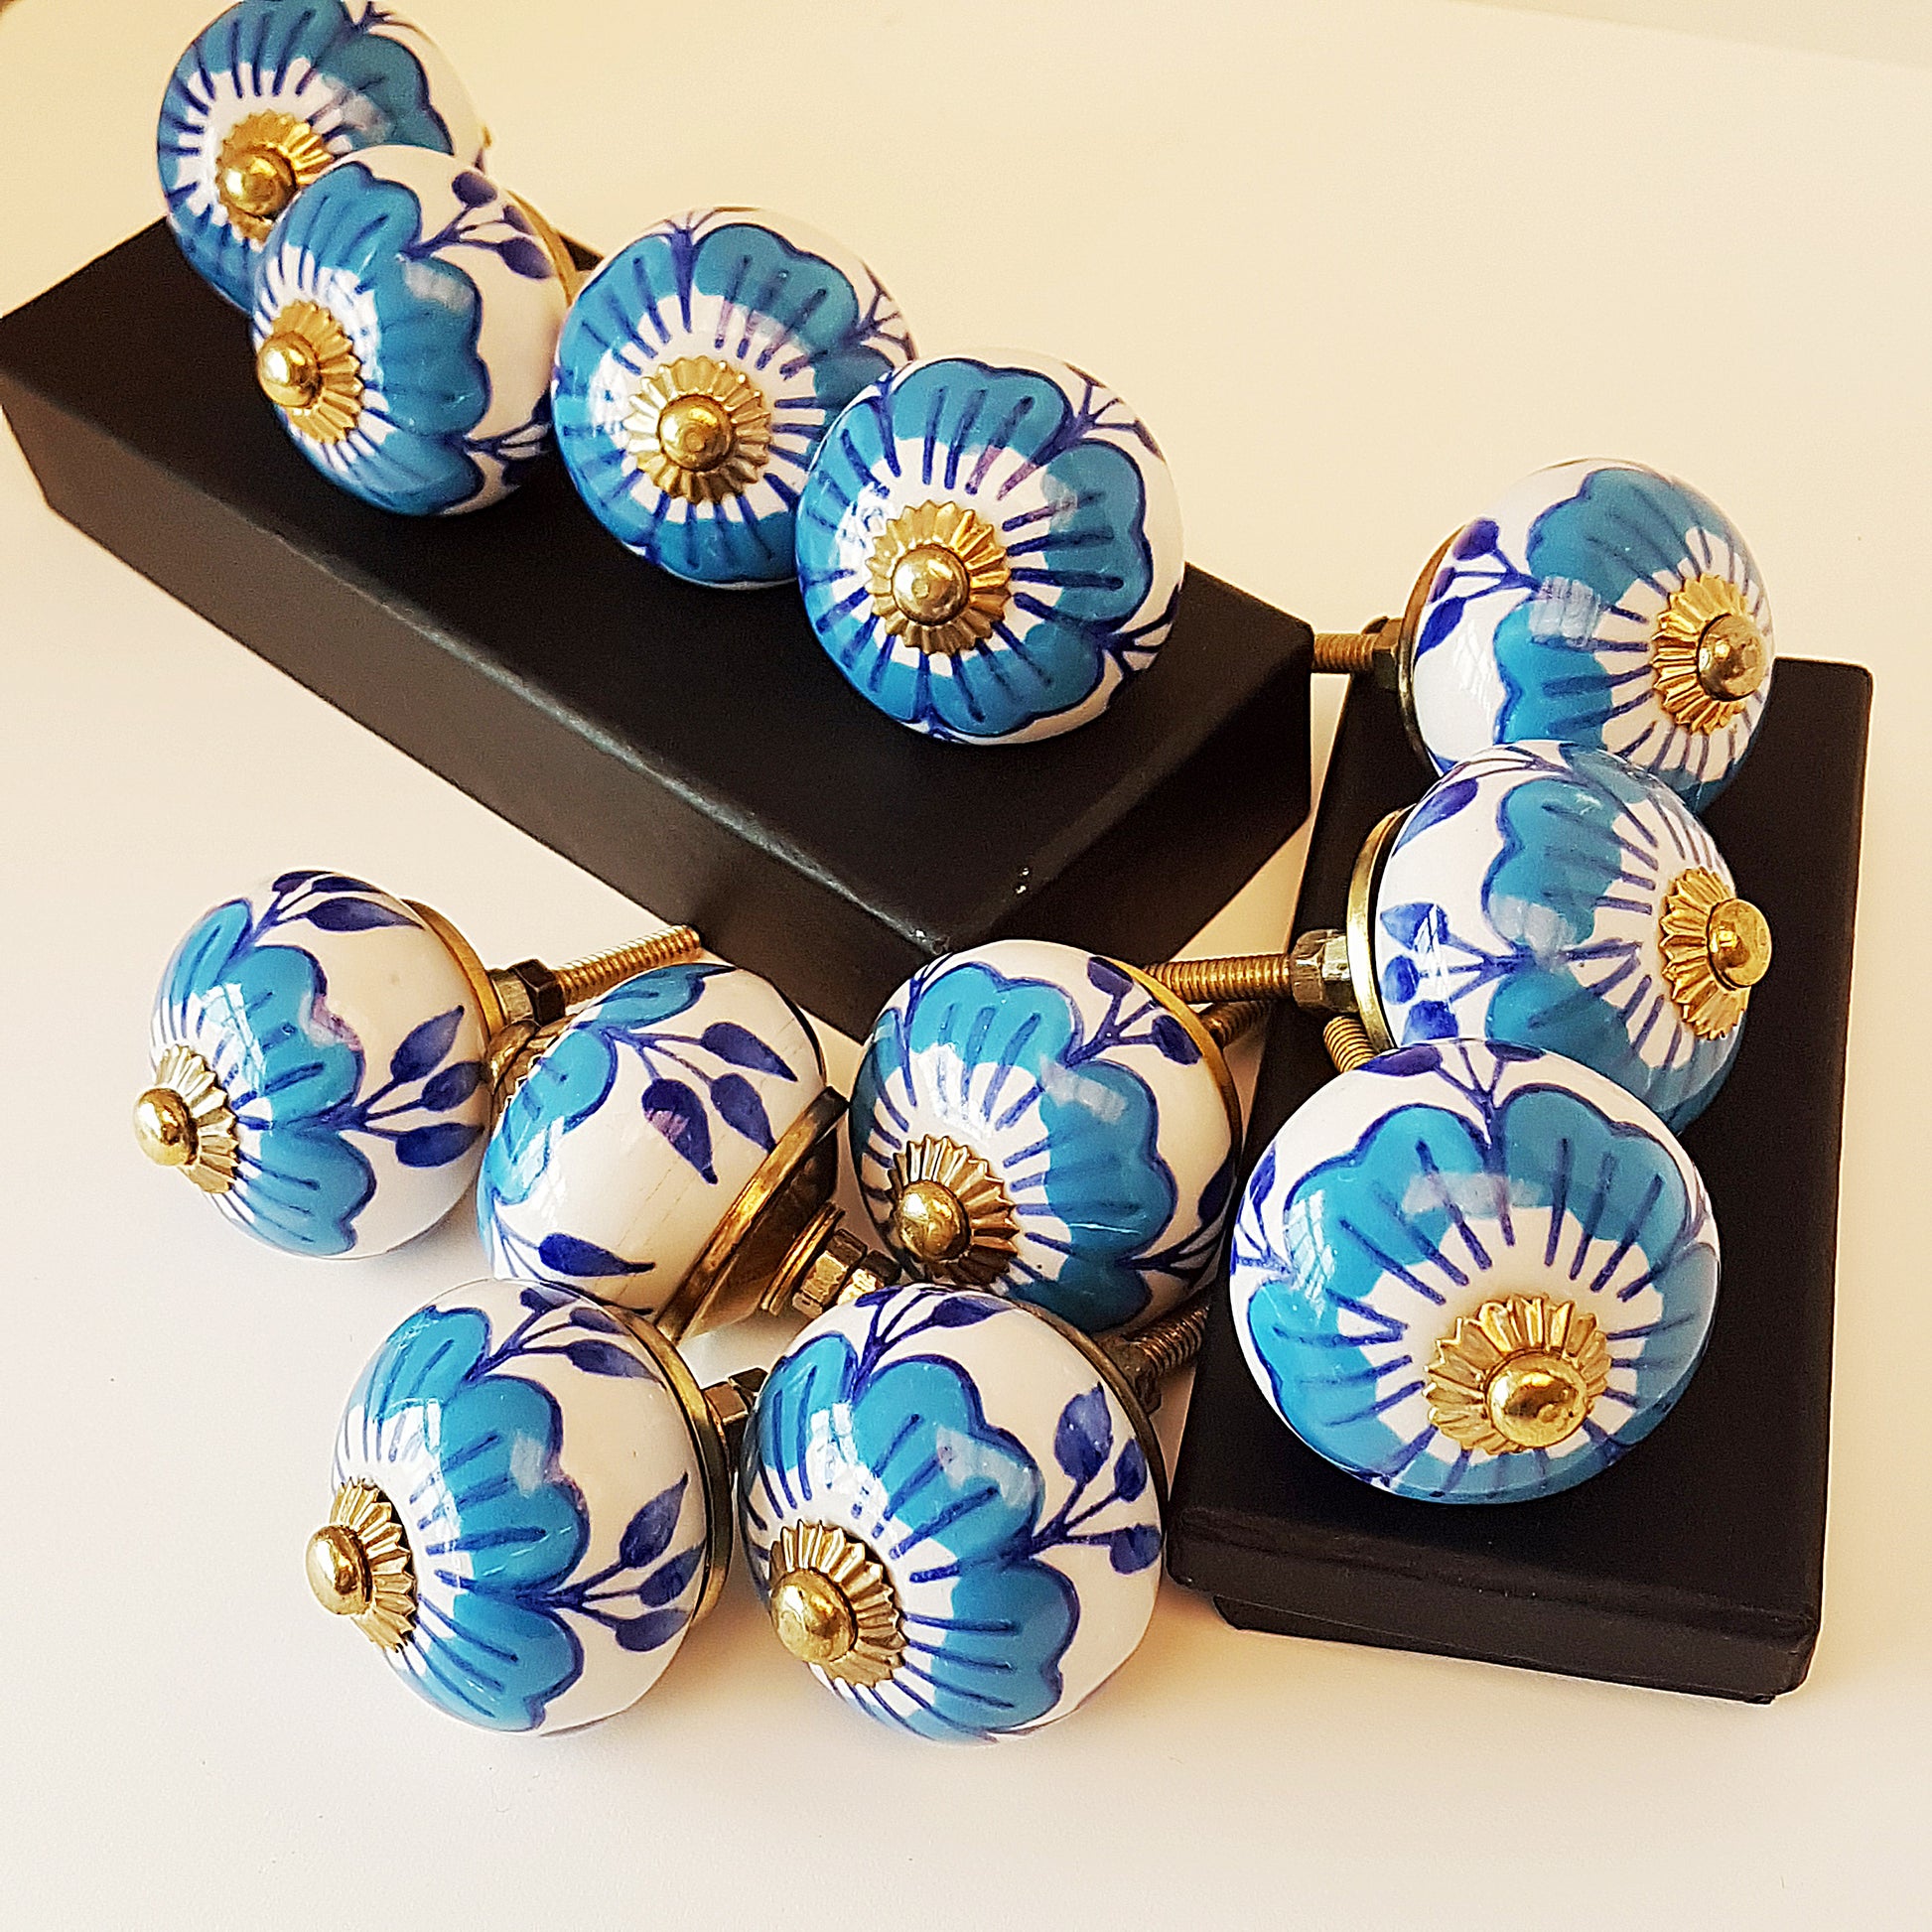 Set of 12 blue & white floral cabinet knobs with gold tone hardware.